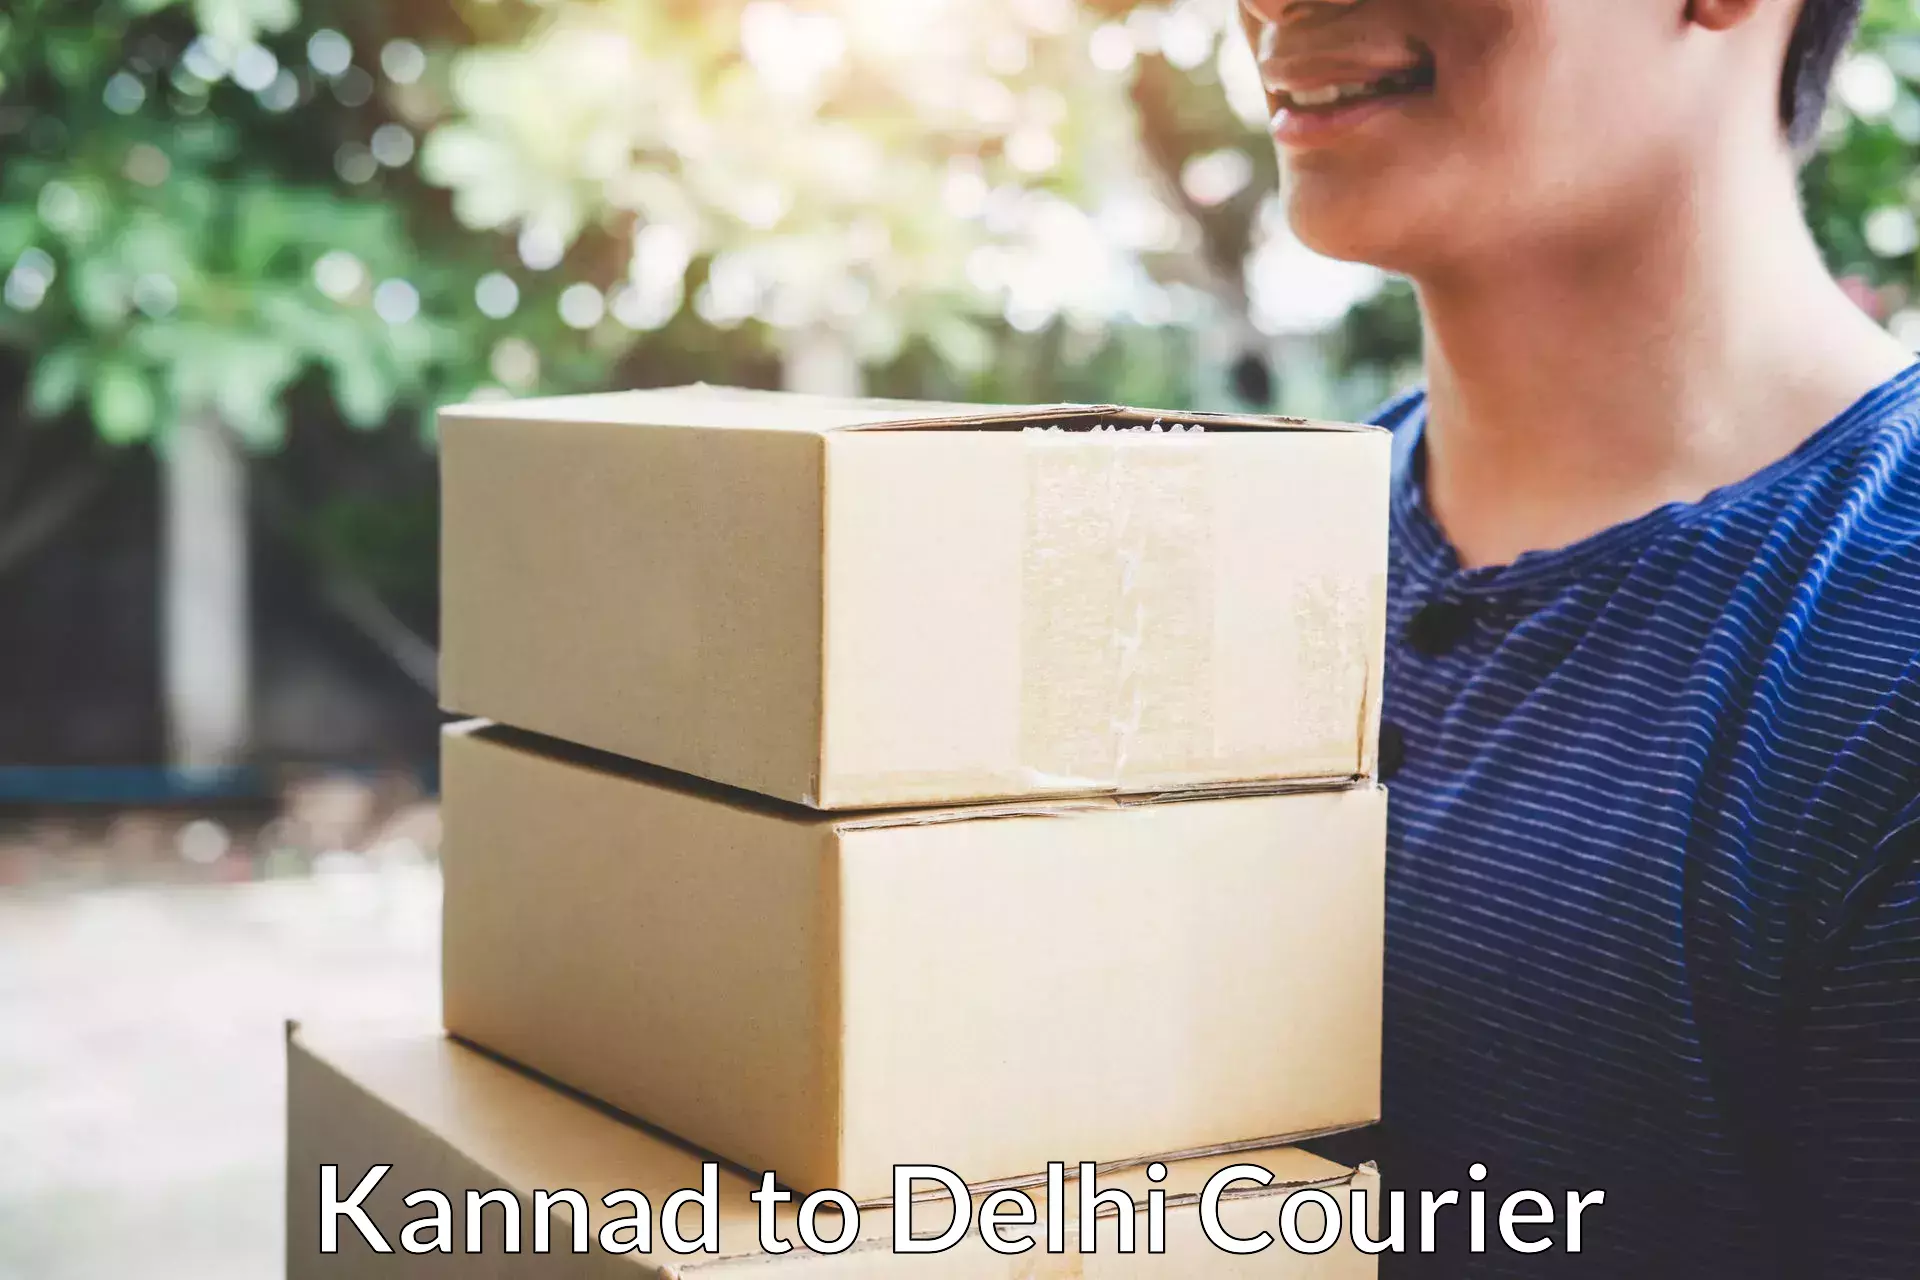 Furniture relocation experts Kannad to Lodhi Road